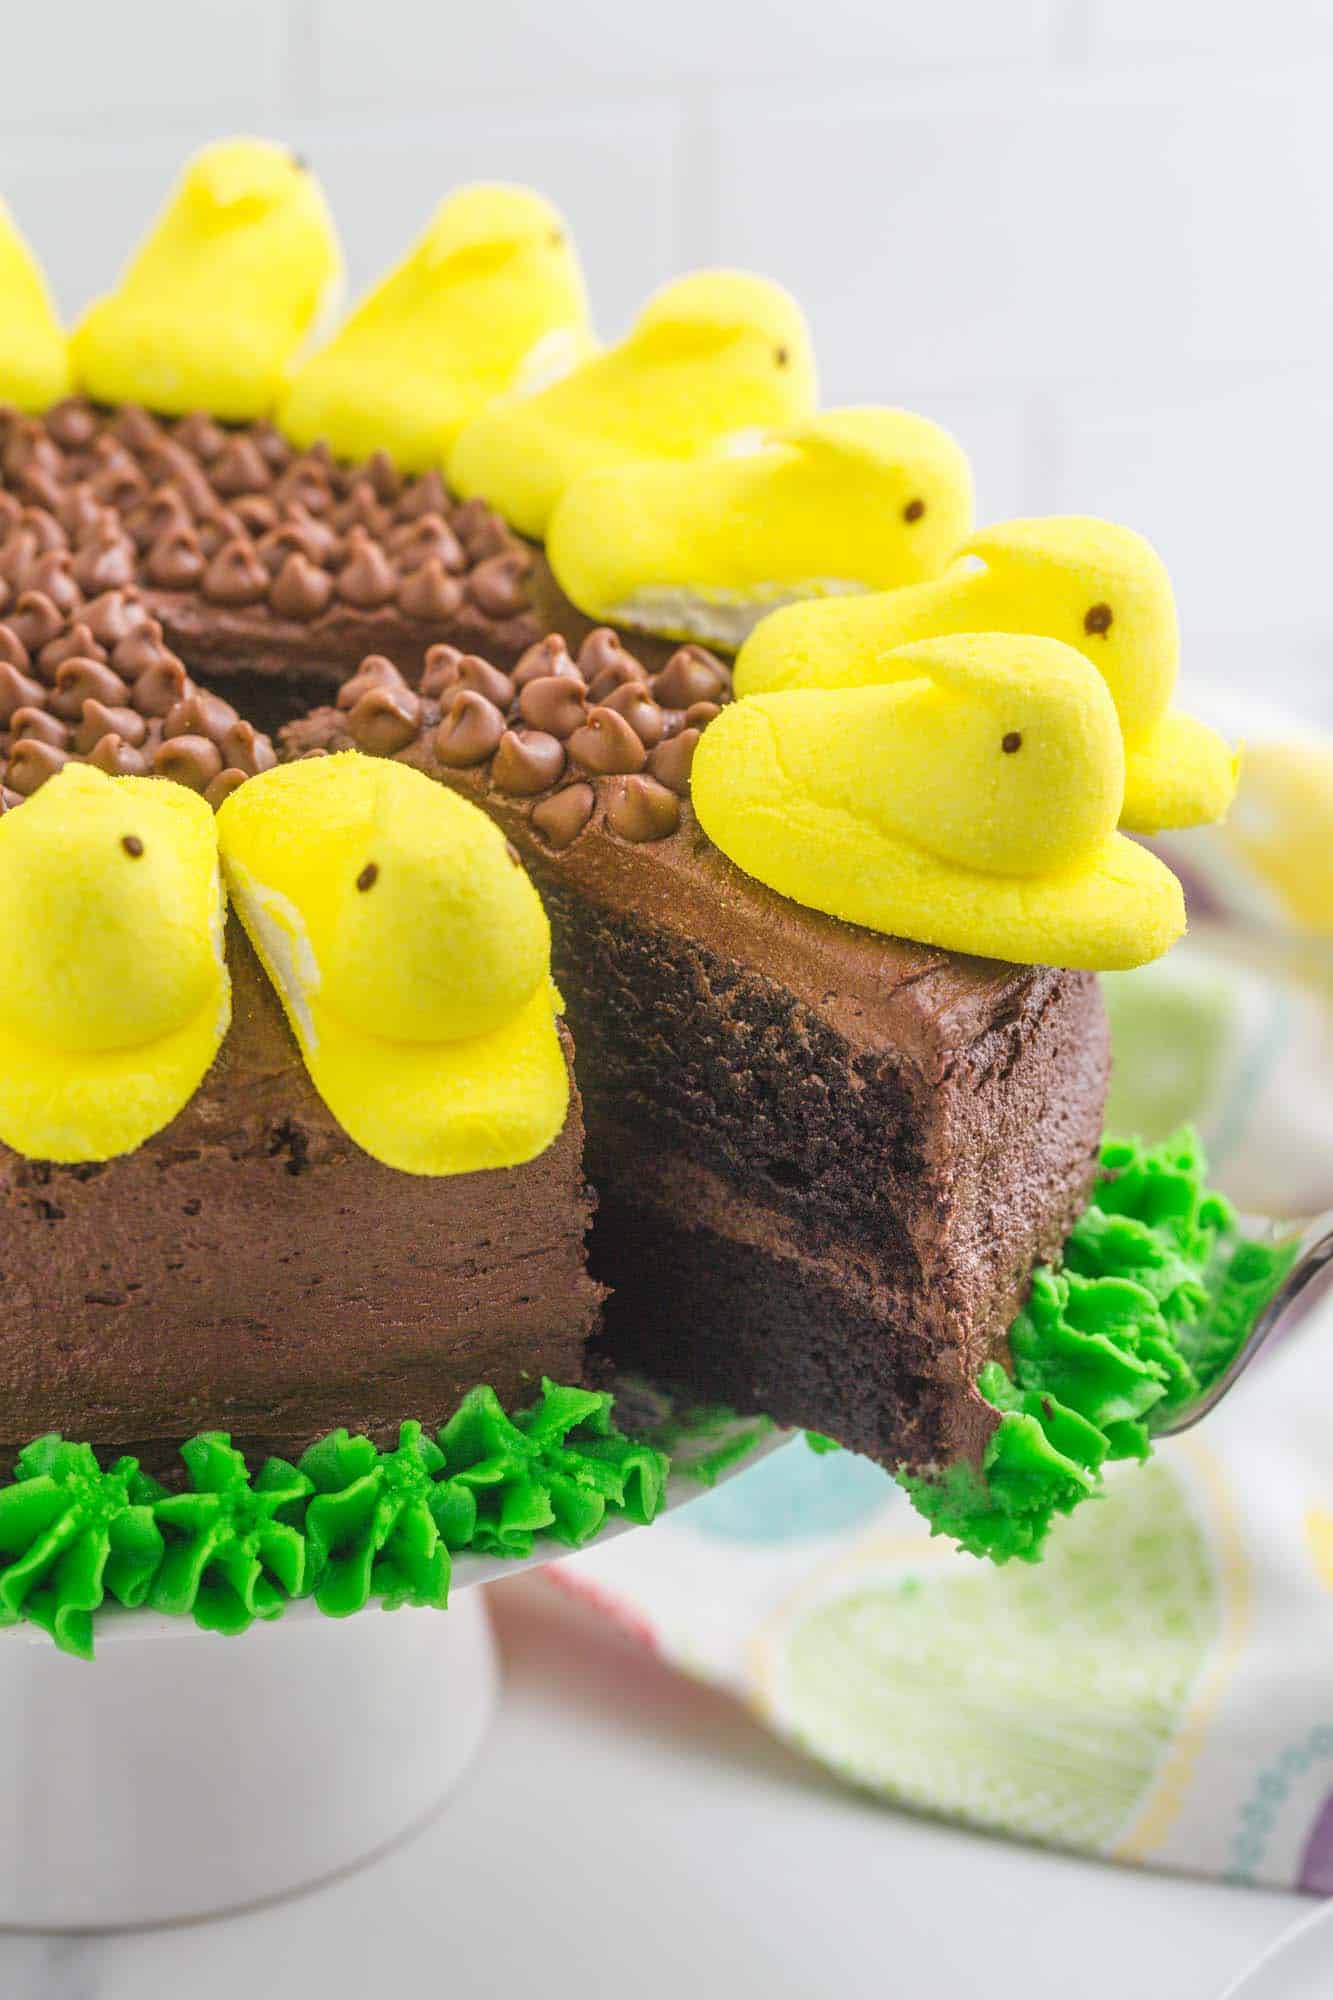 a slice of chocolate cake with yellow peeps on it is being removed from the whole sunflower peeps cake with a cake server.